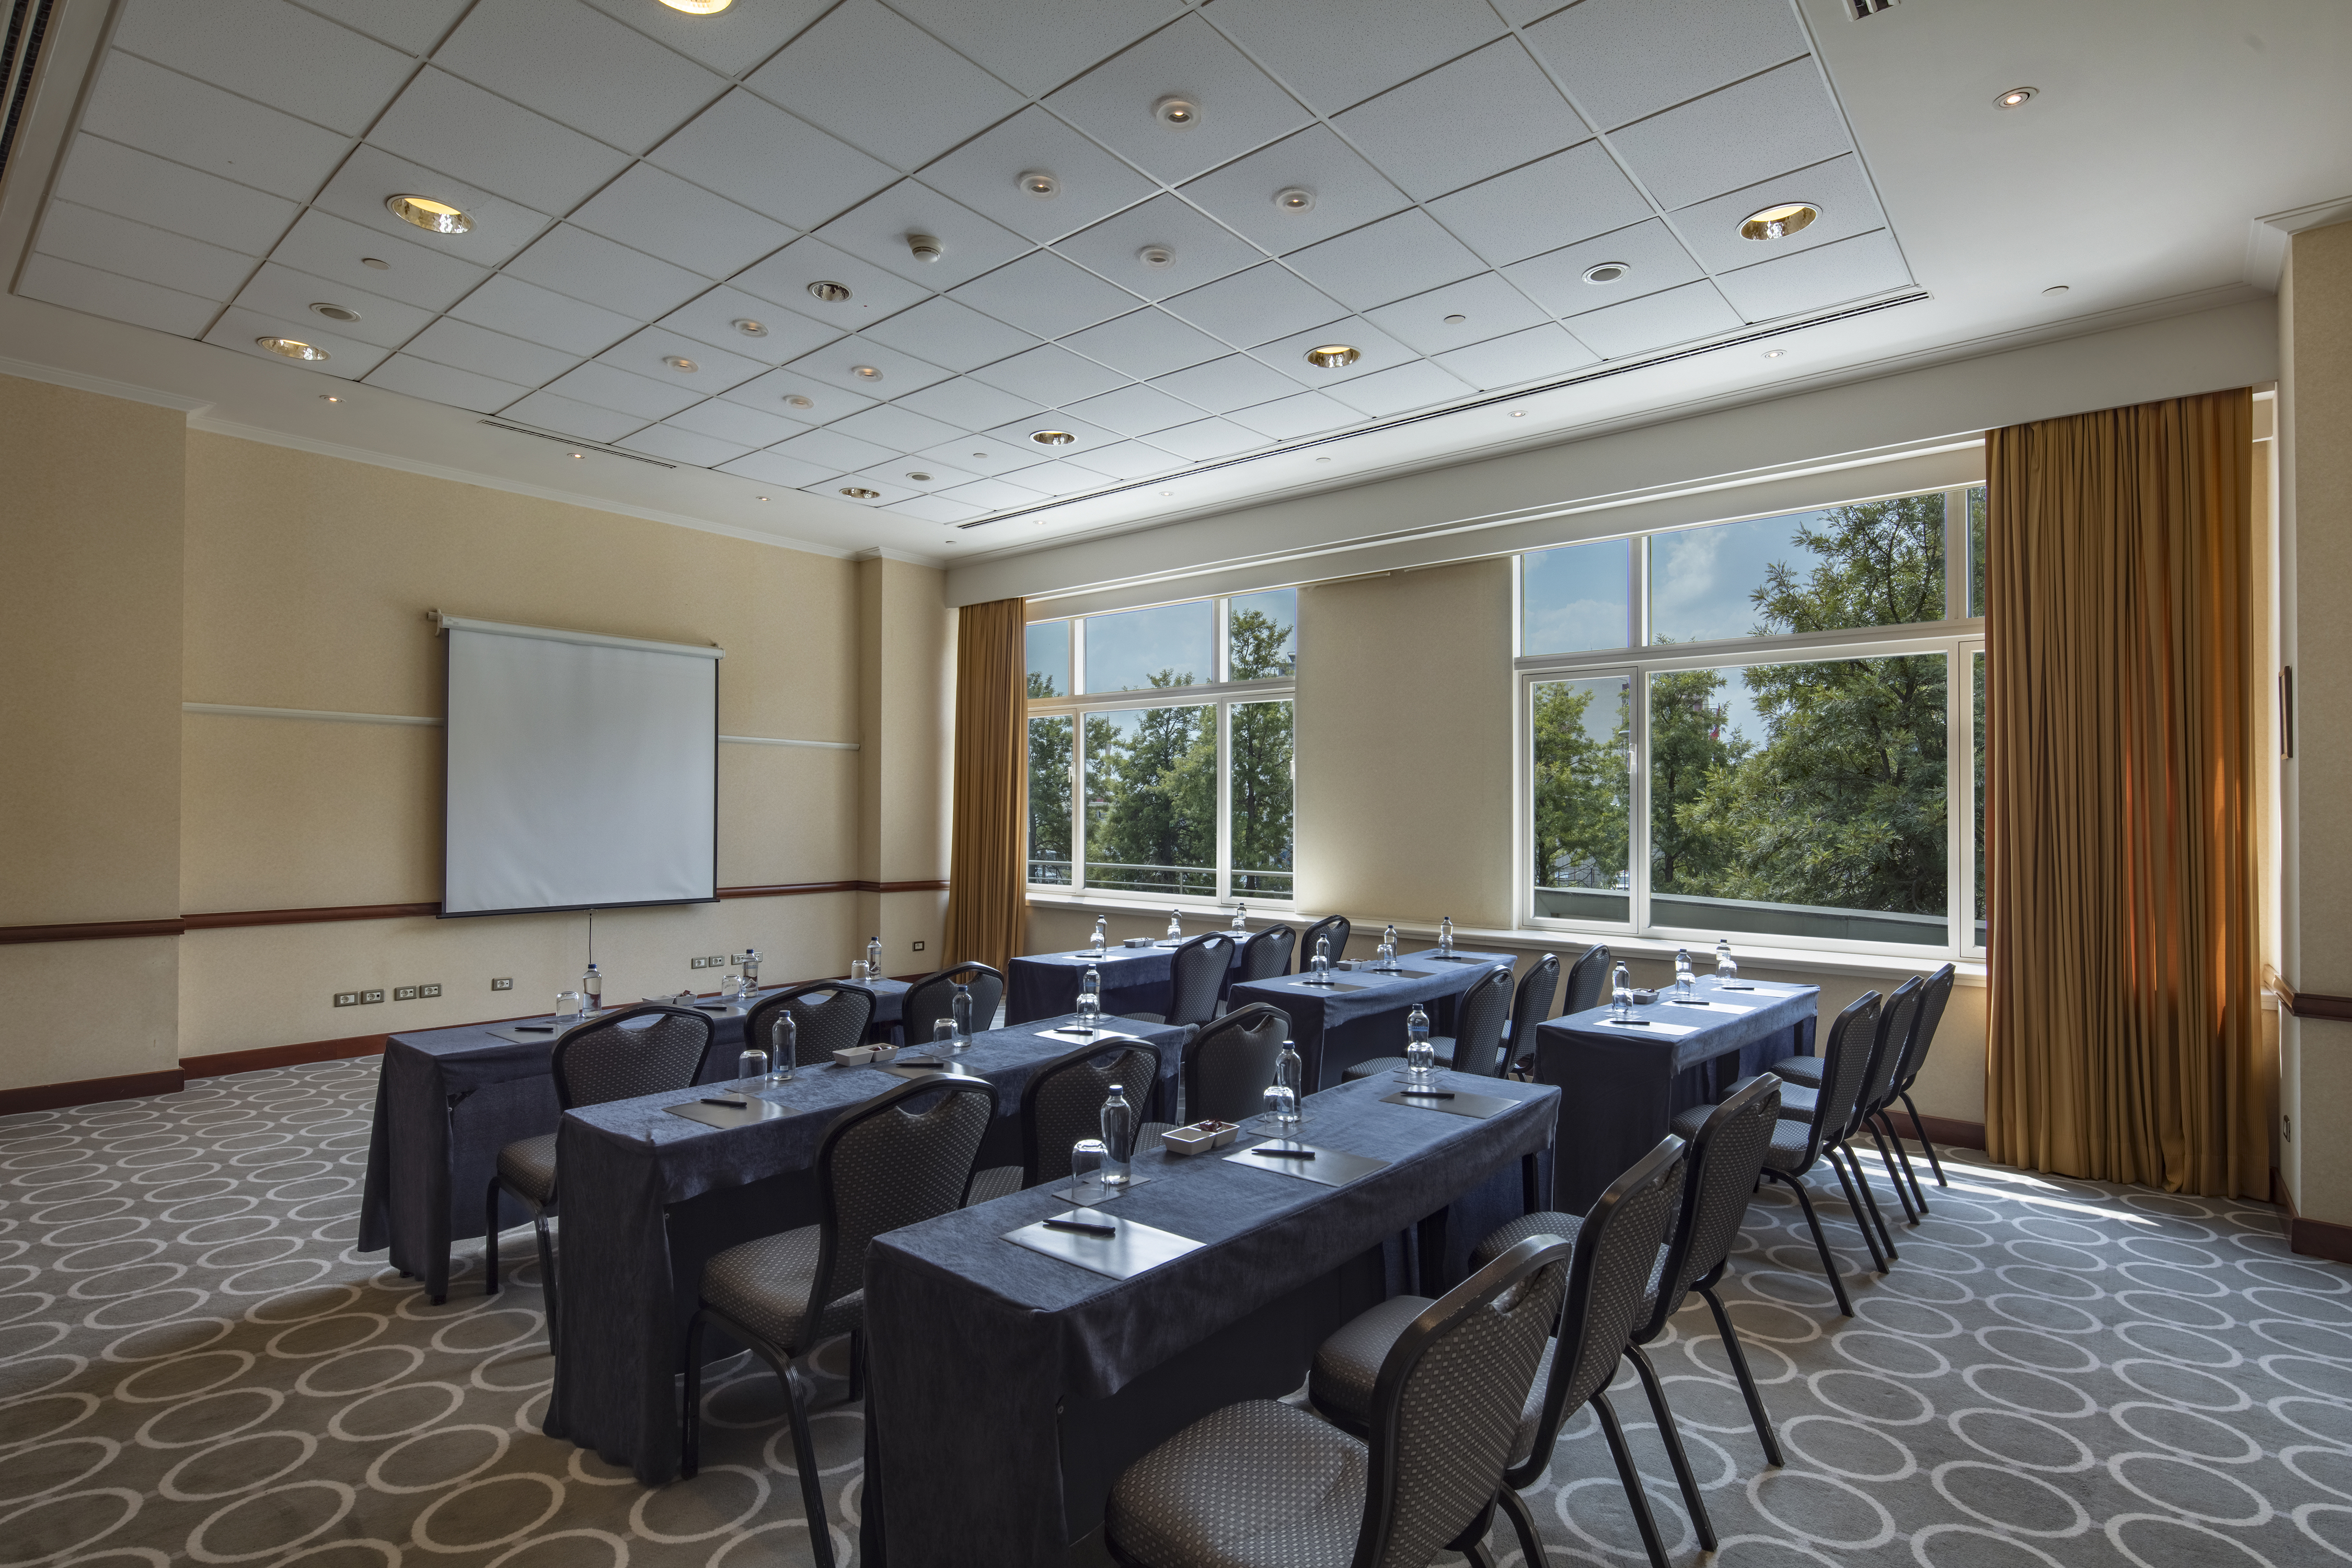 Adana HiltonSA Meeting Room with Natural Day Light